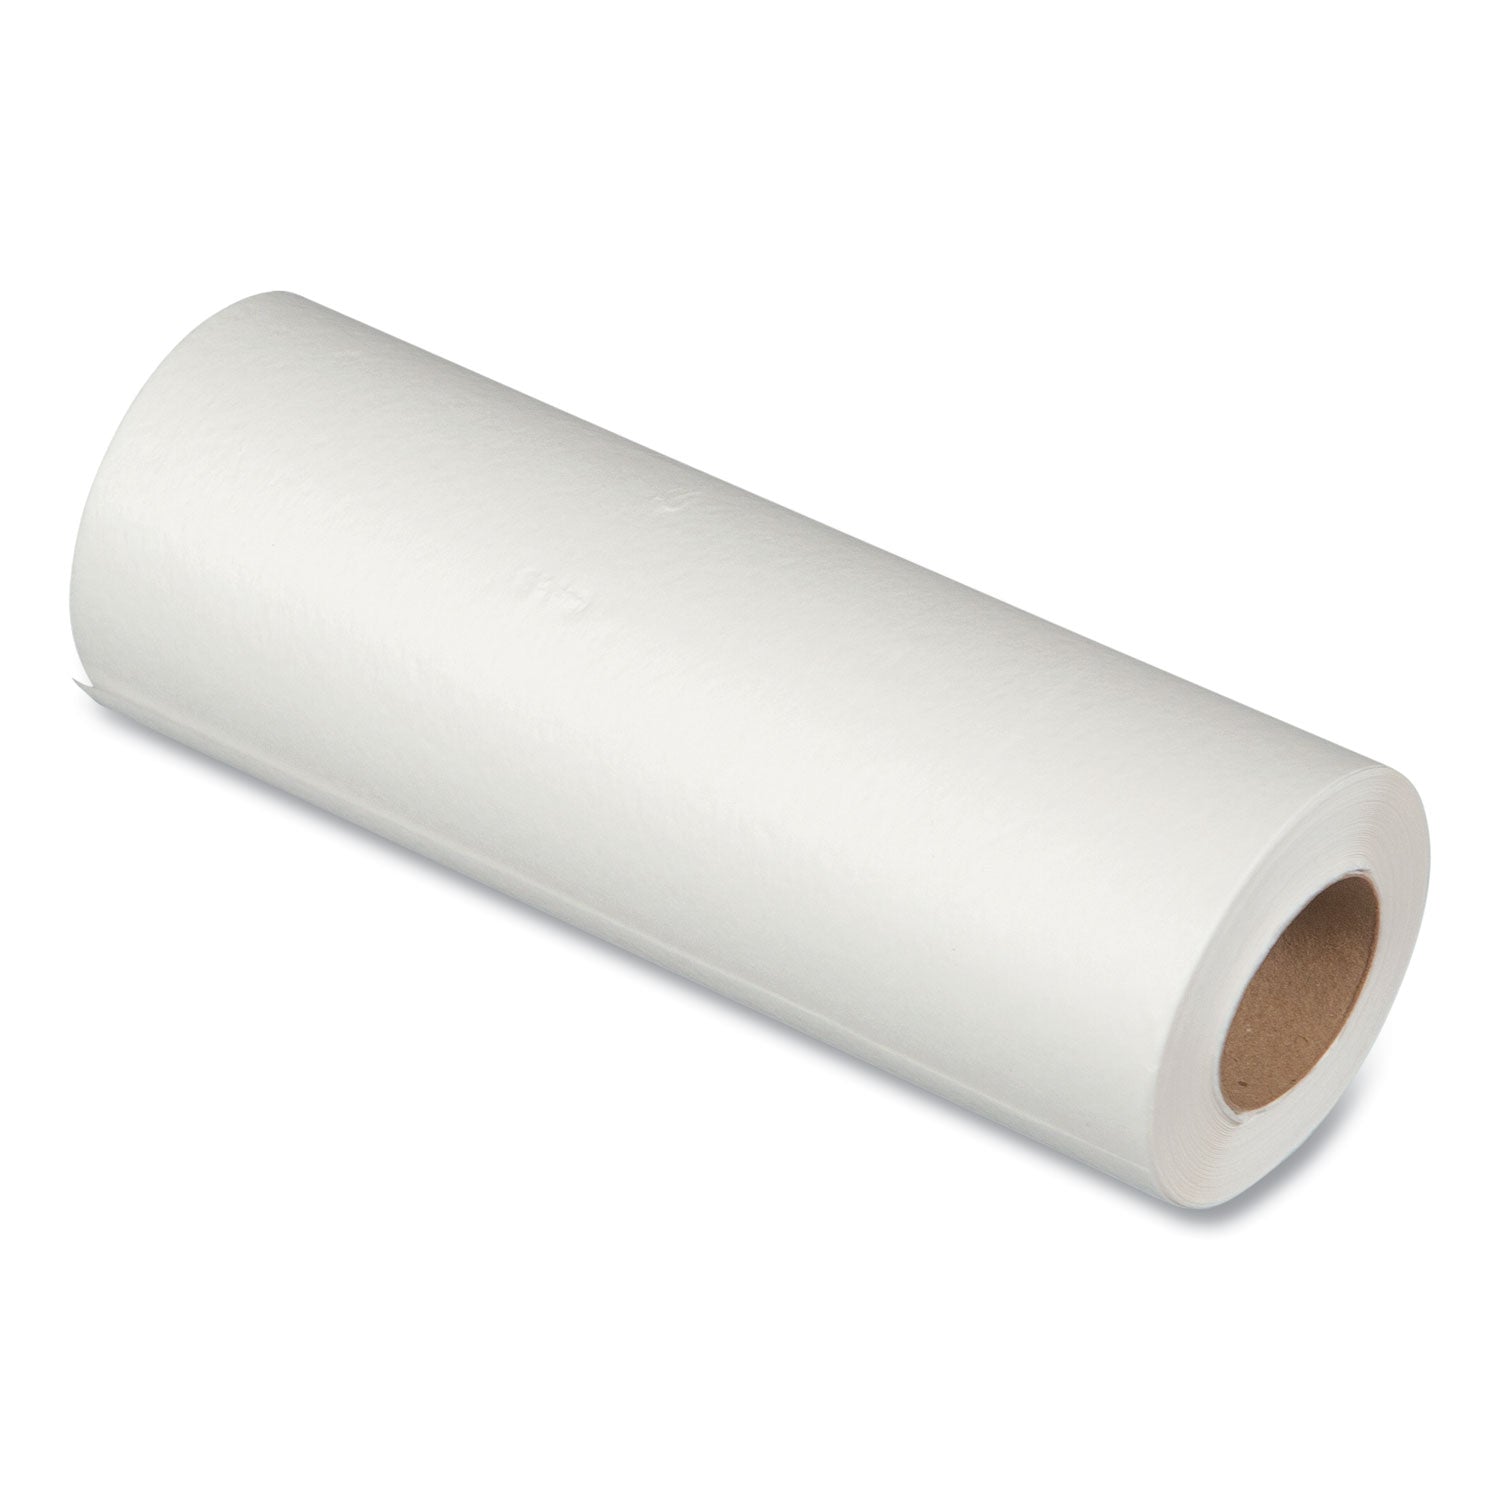 everyday-headrest-paper-roll-smooth-finish-85-x-225-ft-white-25-carton_bhc980900m - 1